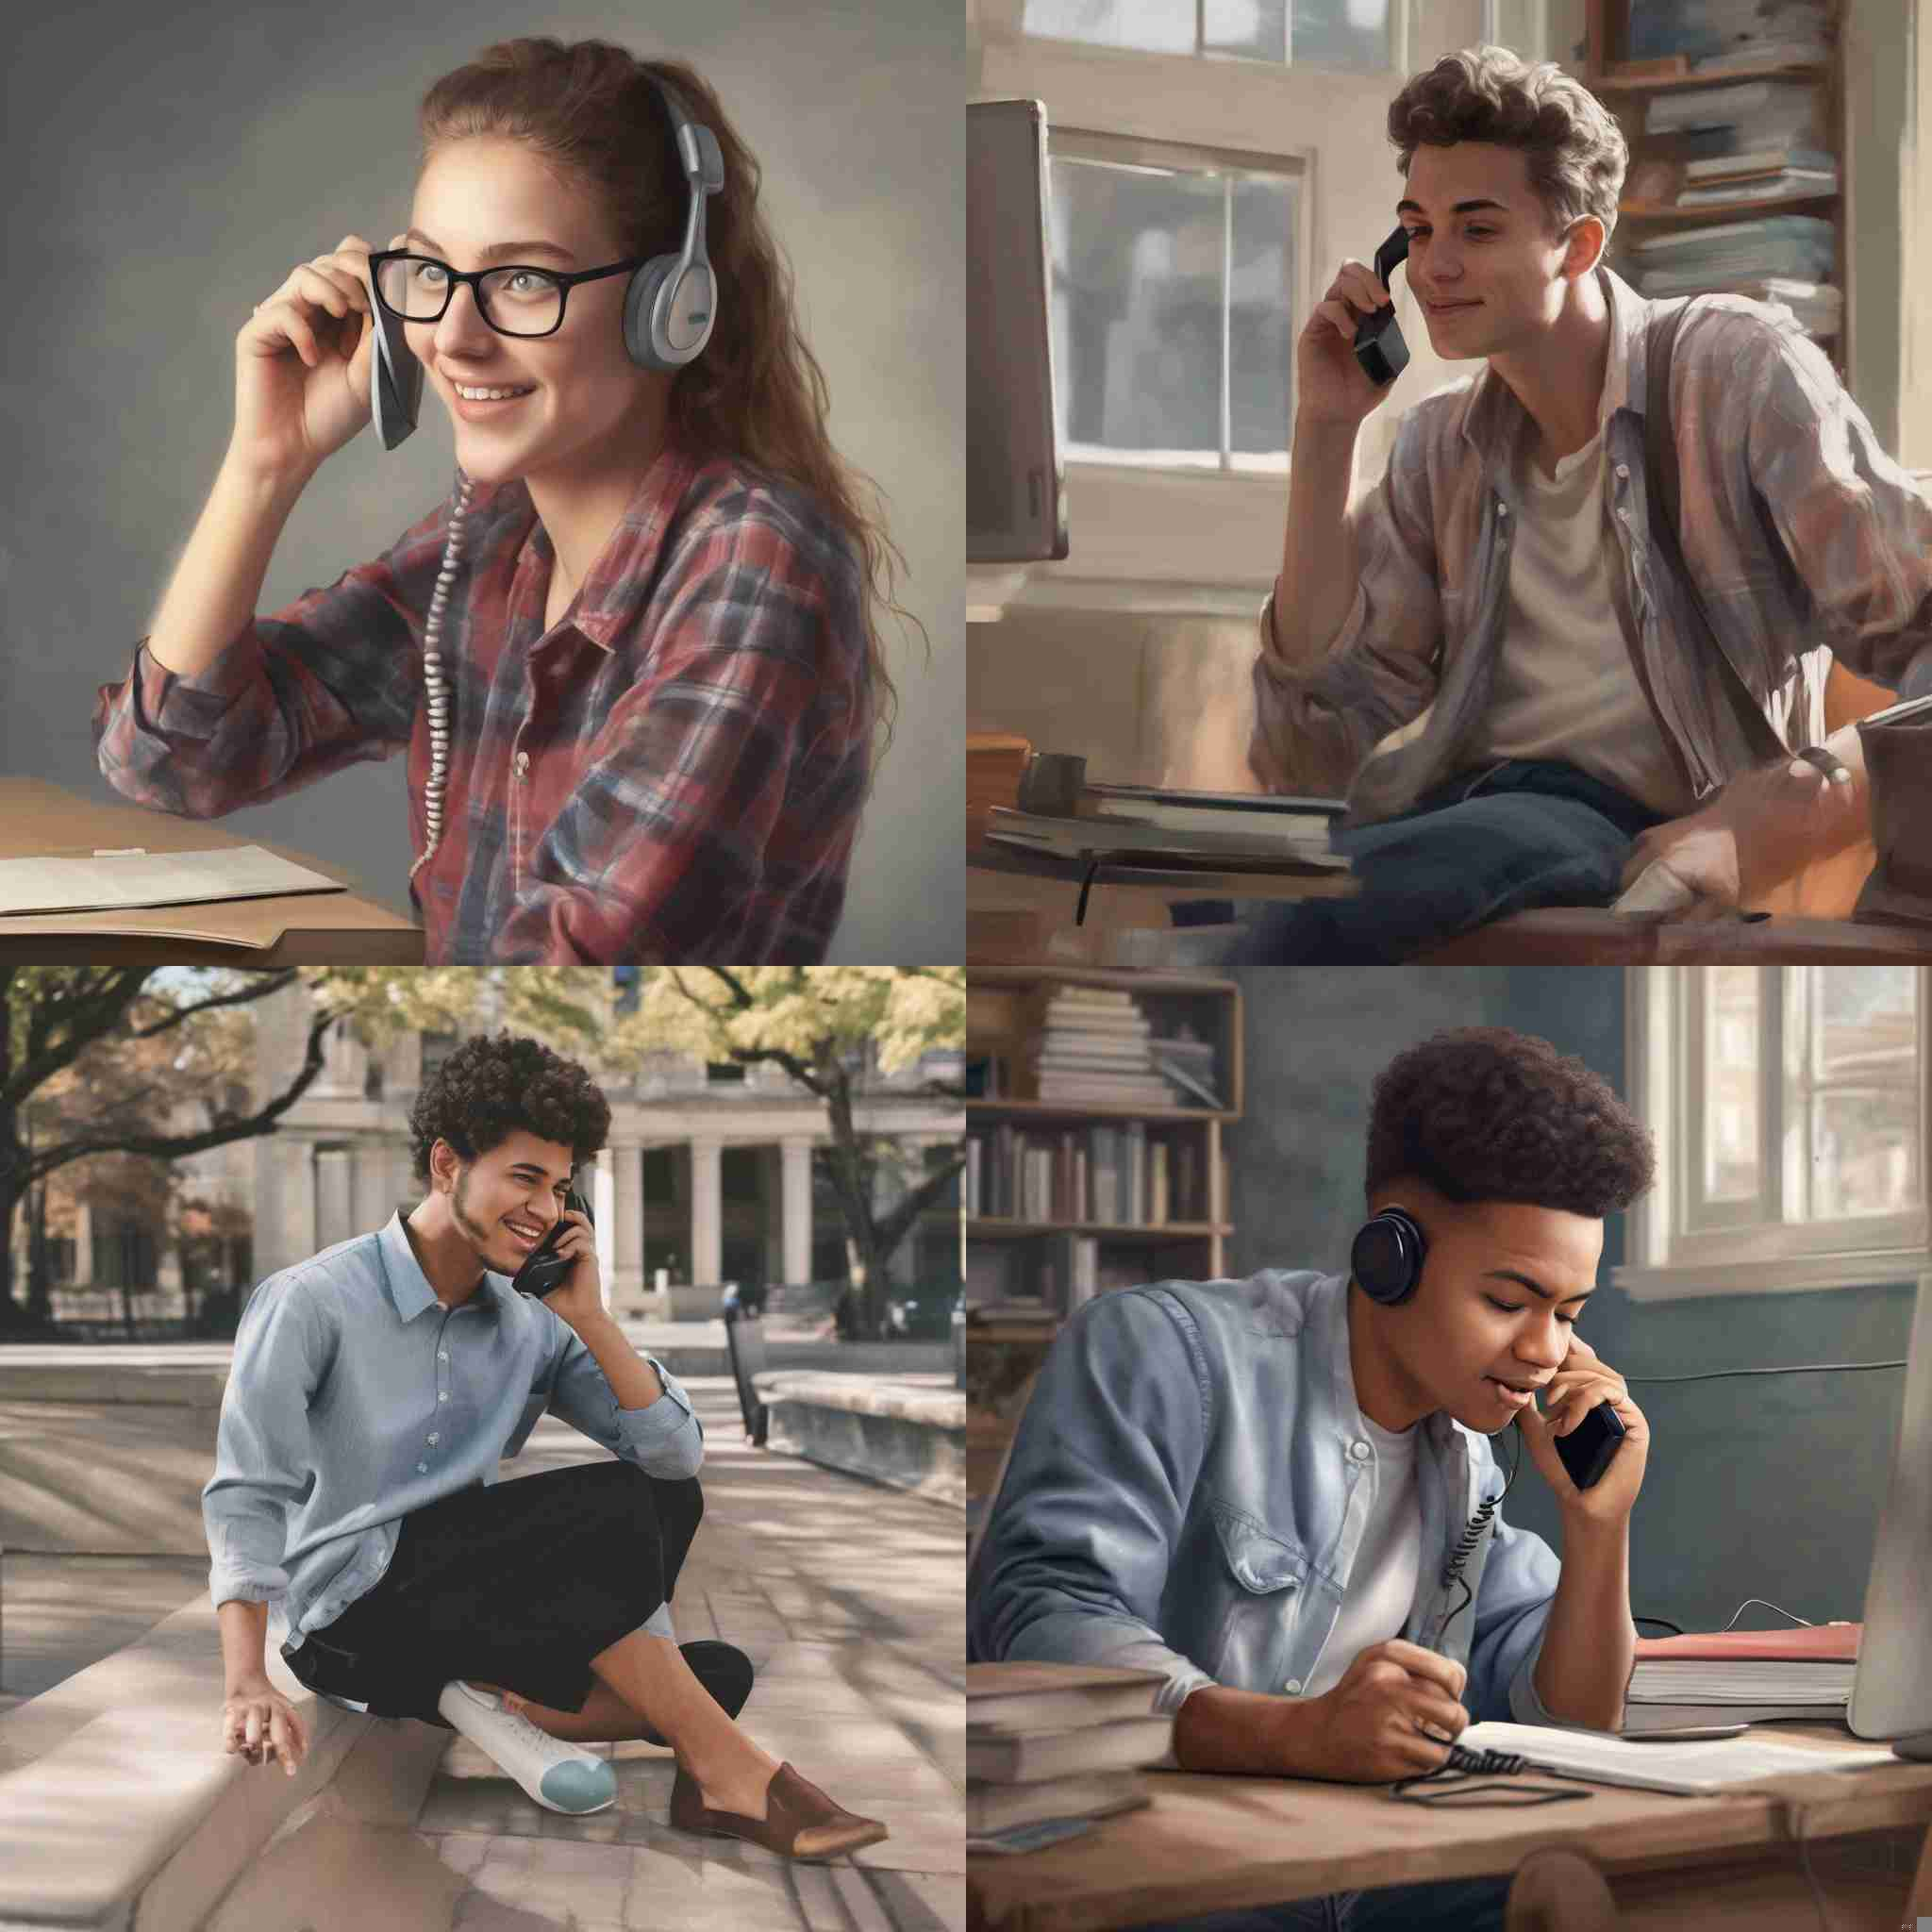 A college student making a call